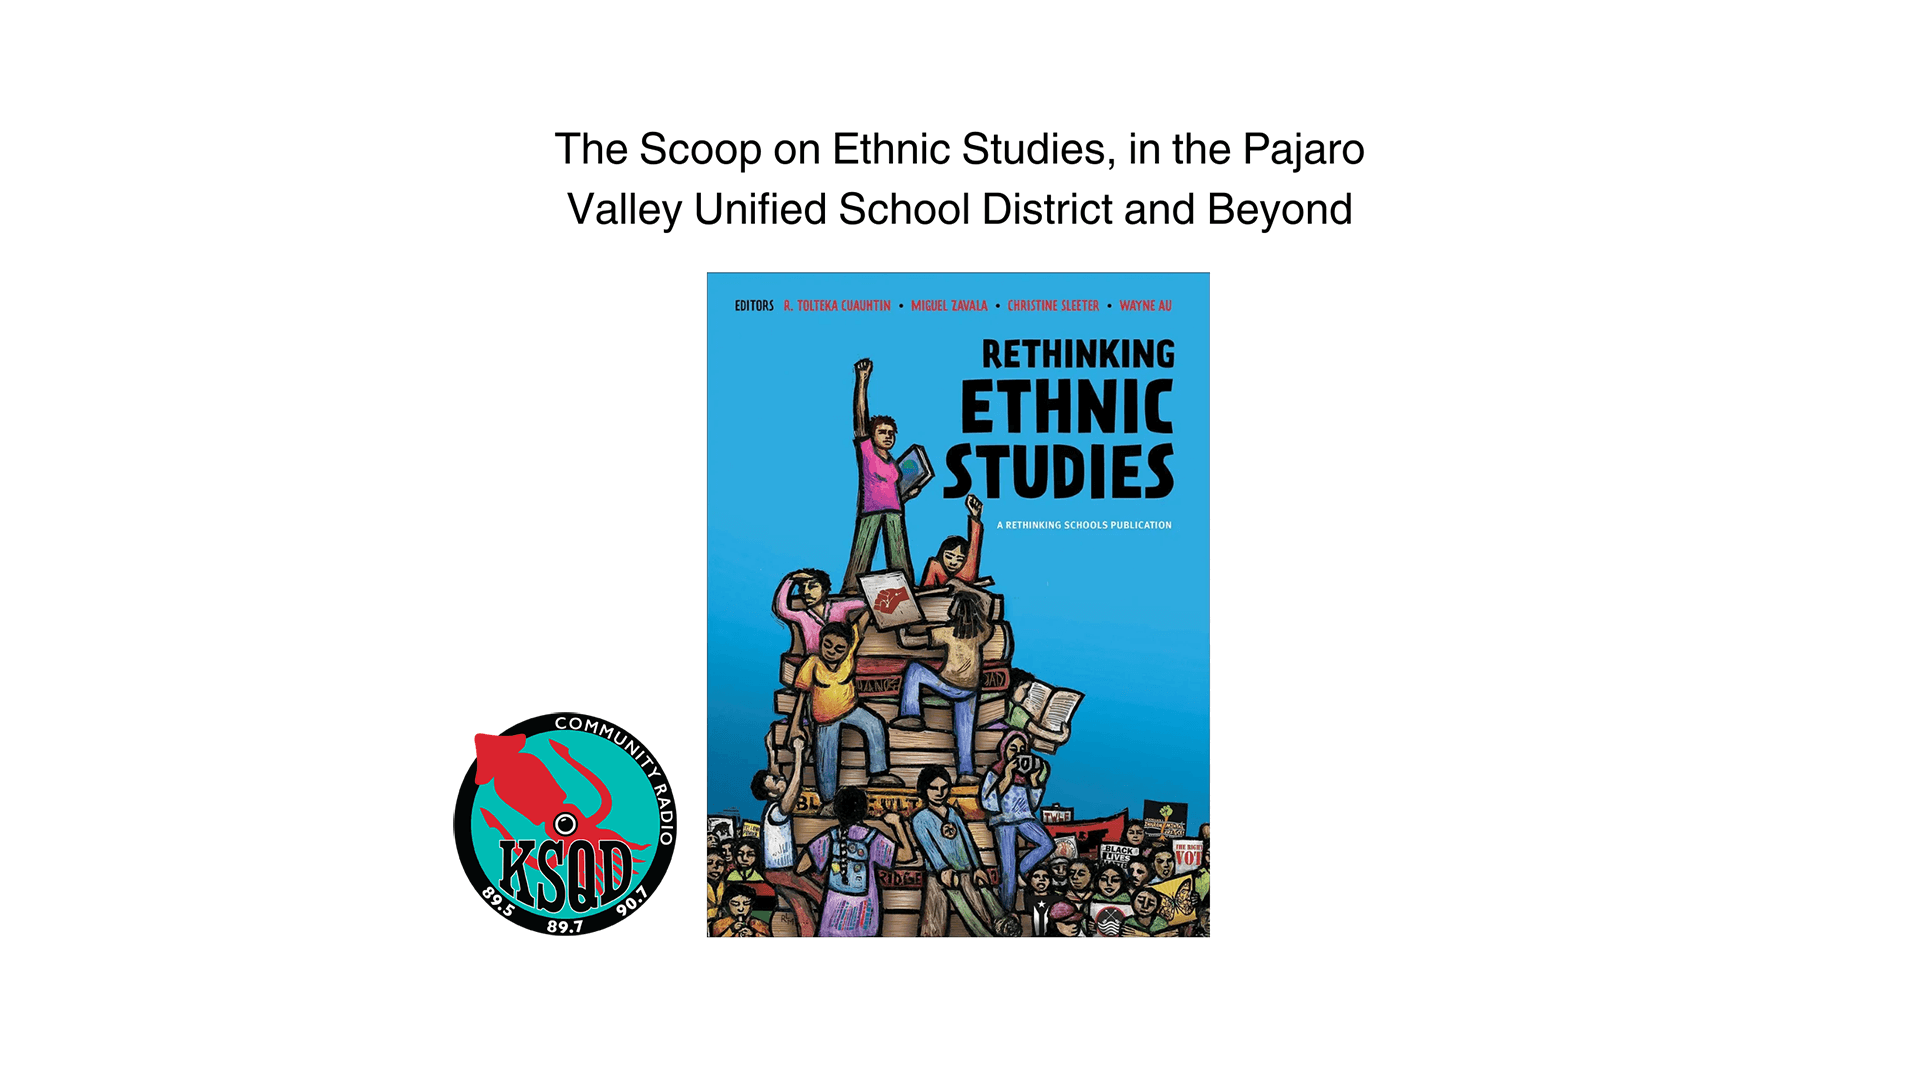 Image for display with article titled The Scoop on Ethnic Studies, in the Pajaro Valley Unified School District and Beyond